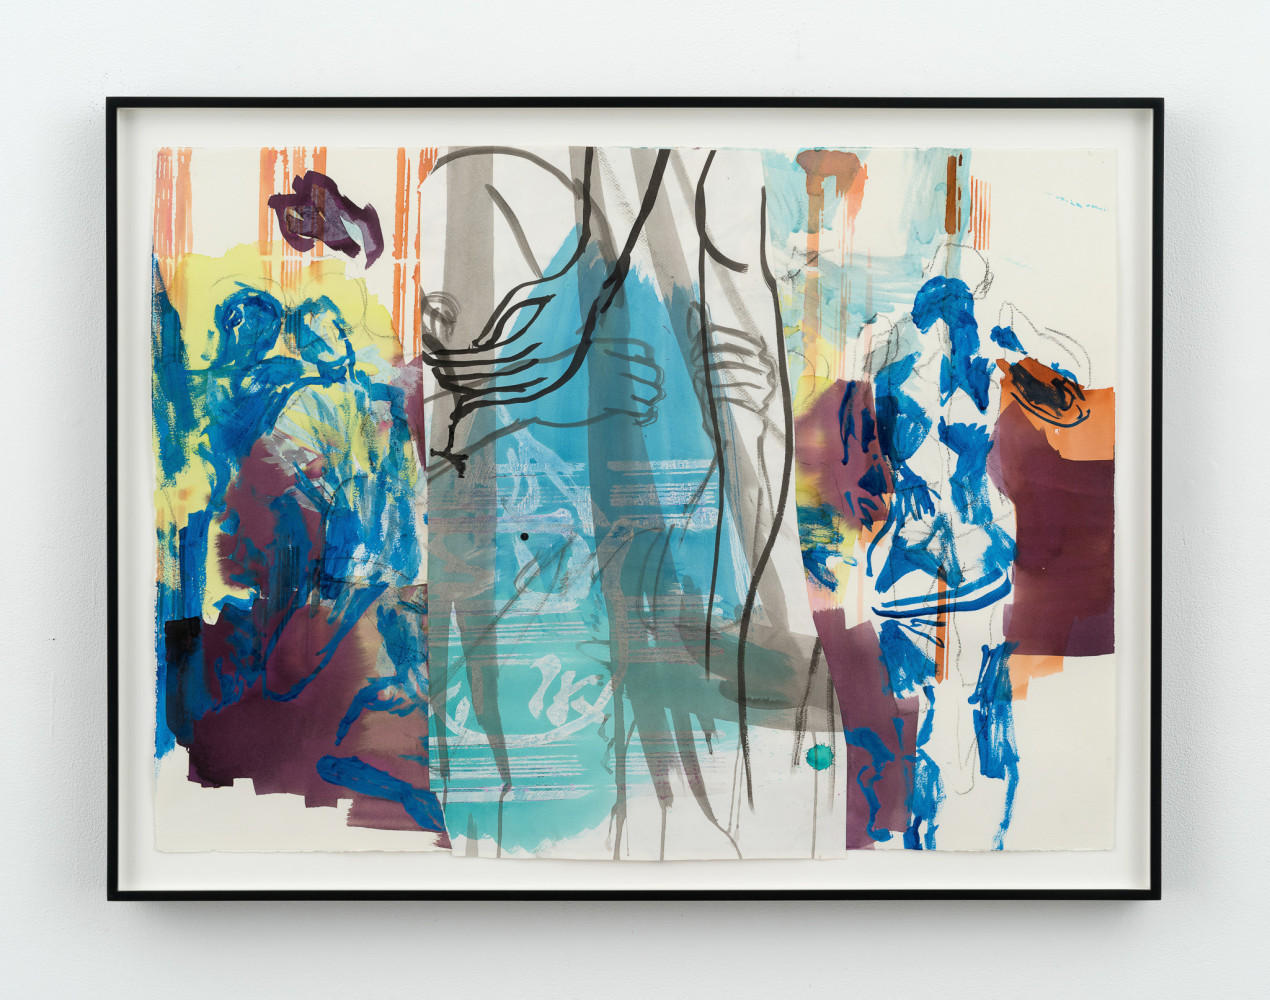 Nick Mauss

Compilation

2020

Watercolor, acrylic and ink on paper

22 x 29 7/8 inches (55.9 x 75.9 cm)

25 x 32 5/8 inches (63.5 x 82.9 cm) framed

Signed verso

NM 792

$24,000

&amp;nbsp;

INQUIRE